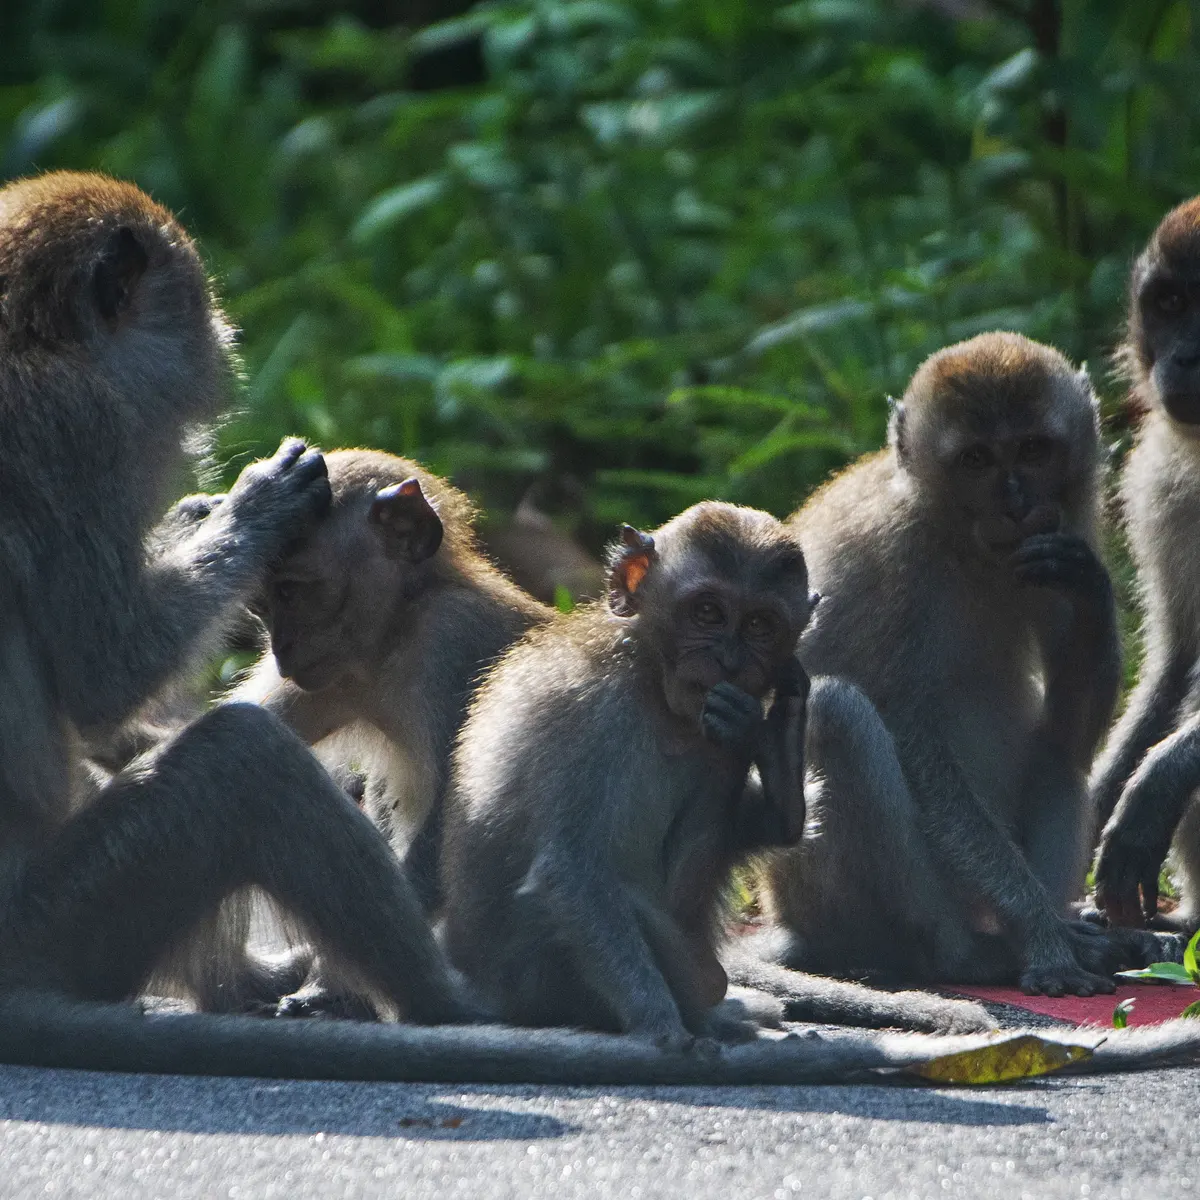 Revealed: US allowing long-tailed macaque imports despite risk of disease